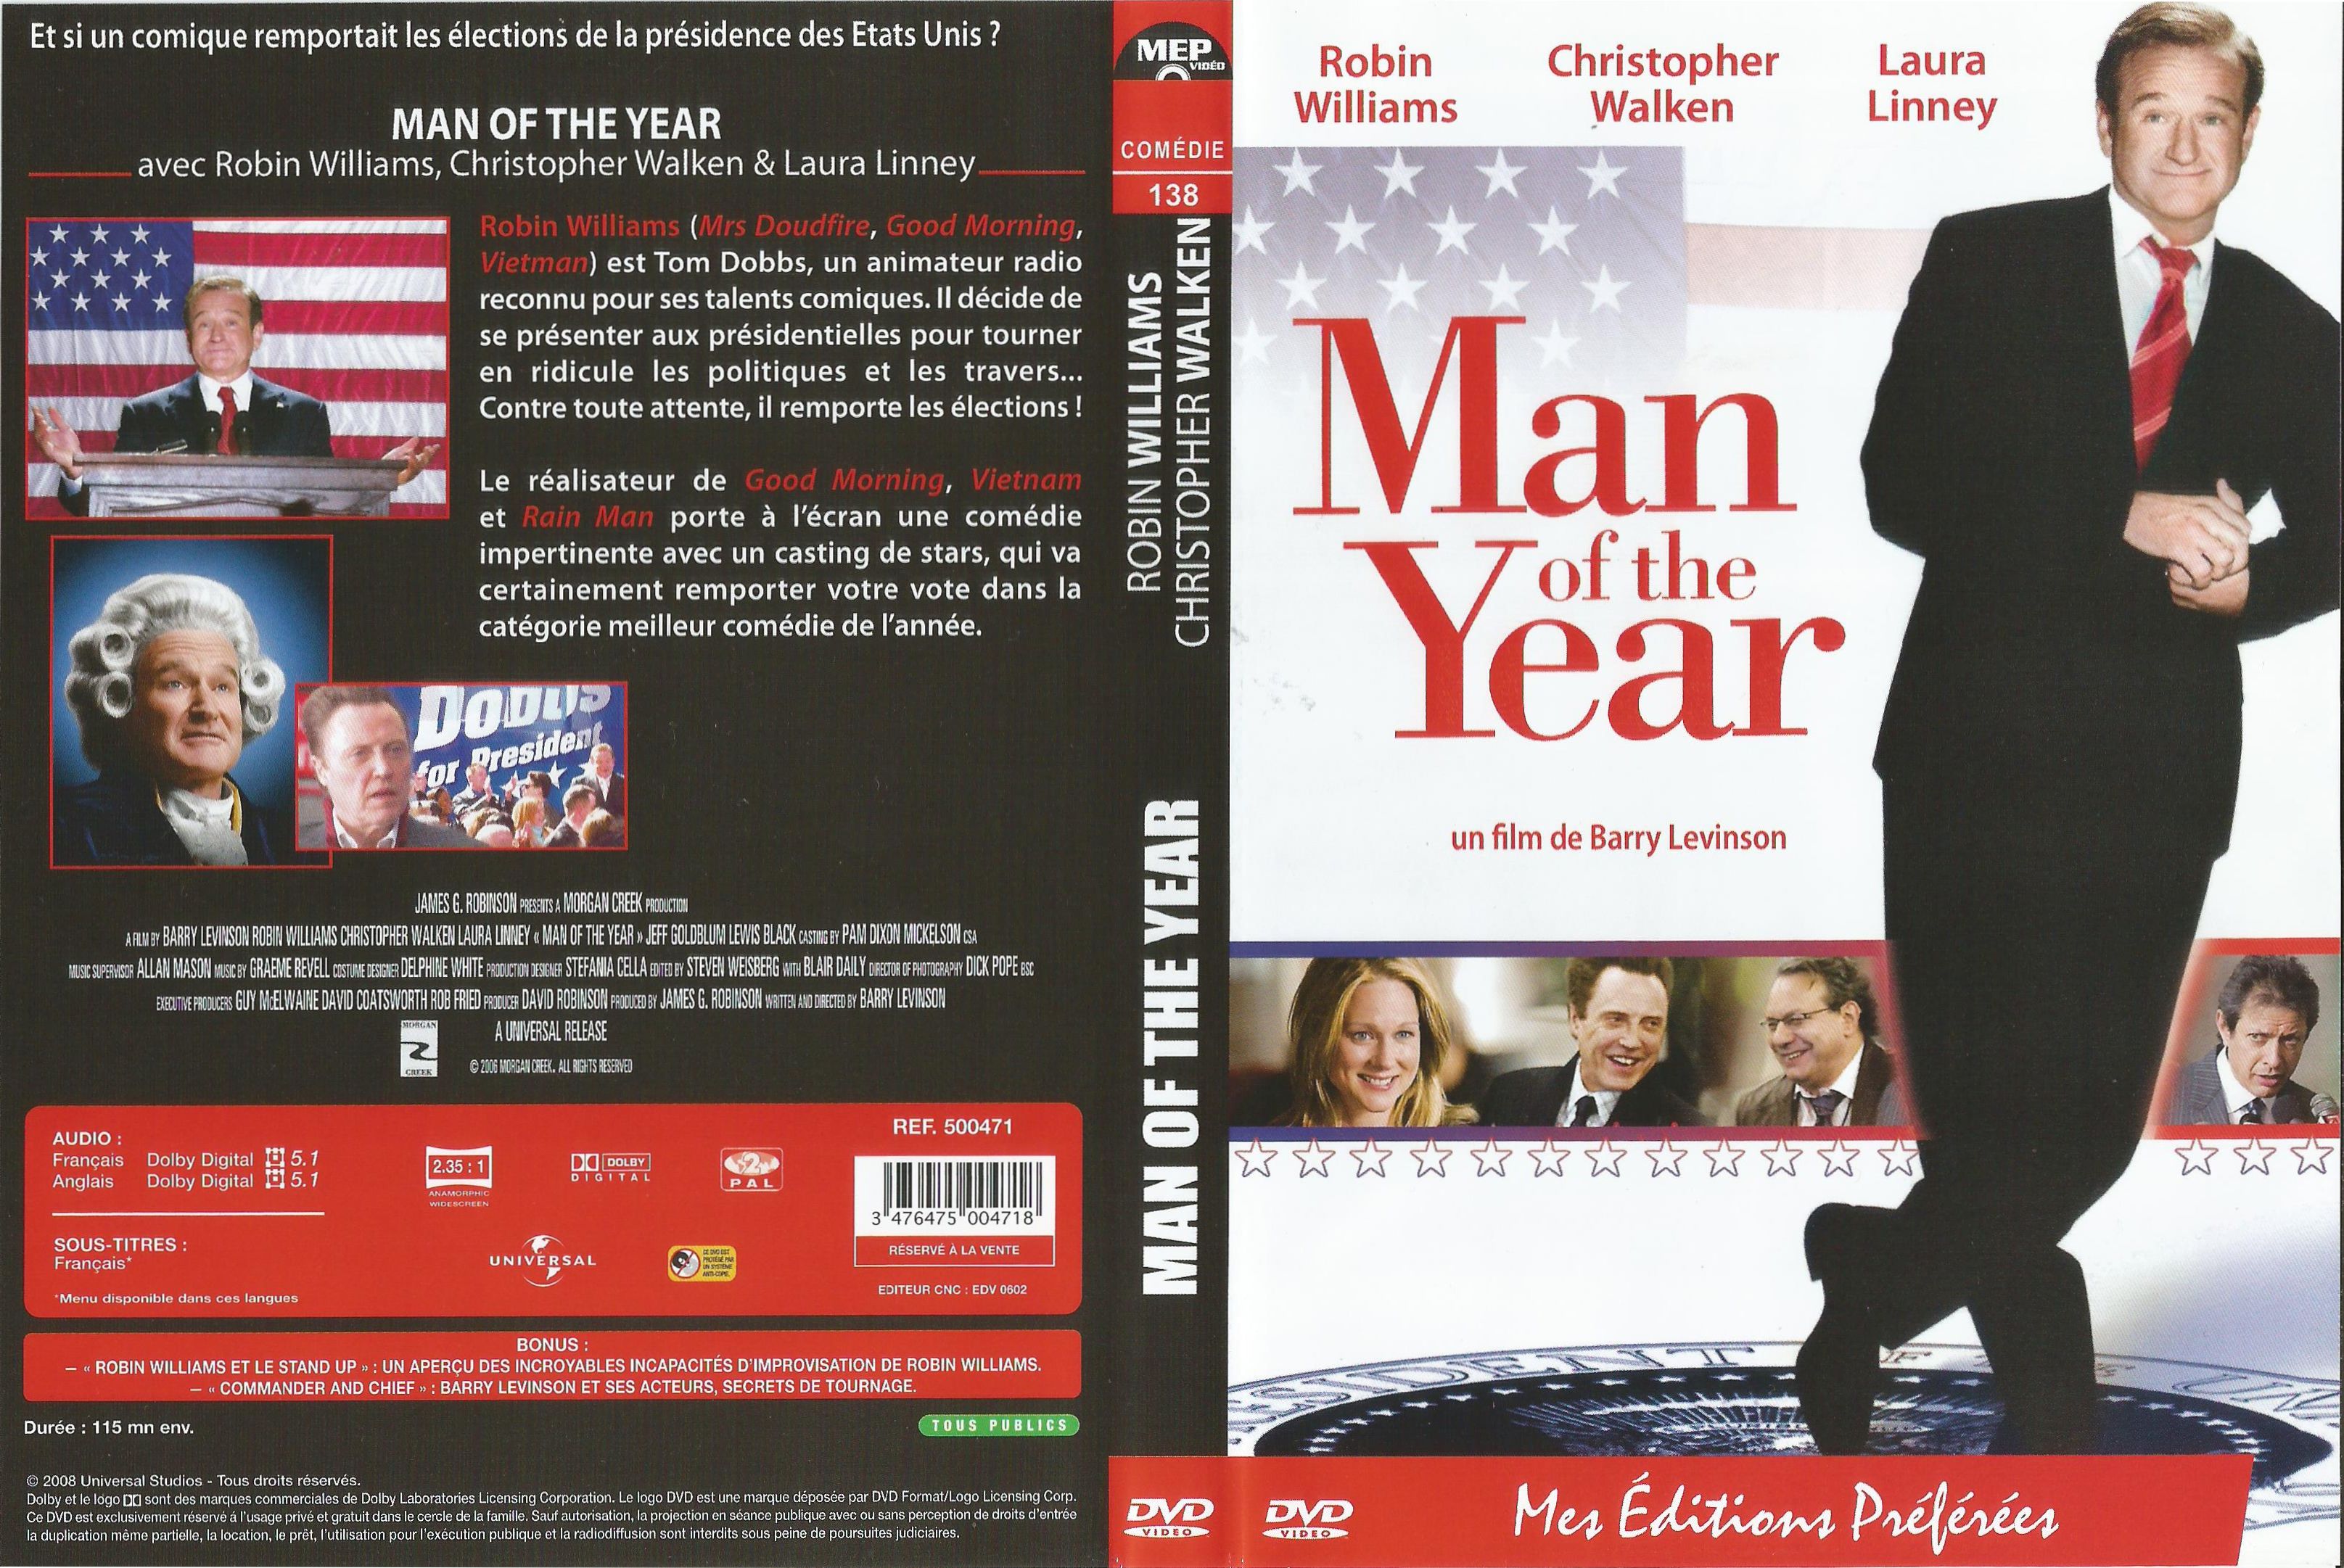 Jaquette DVD Man of the year v2